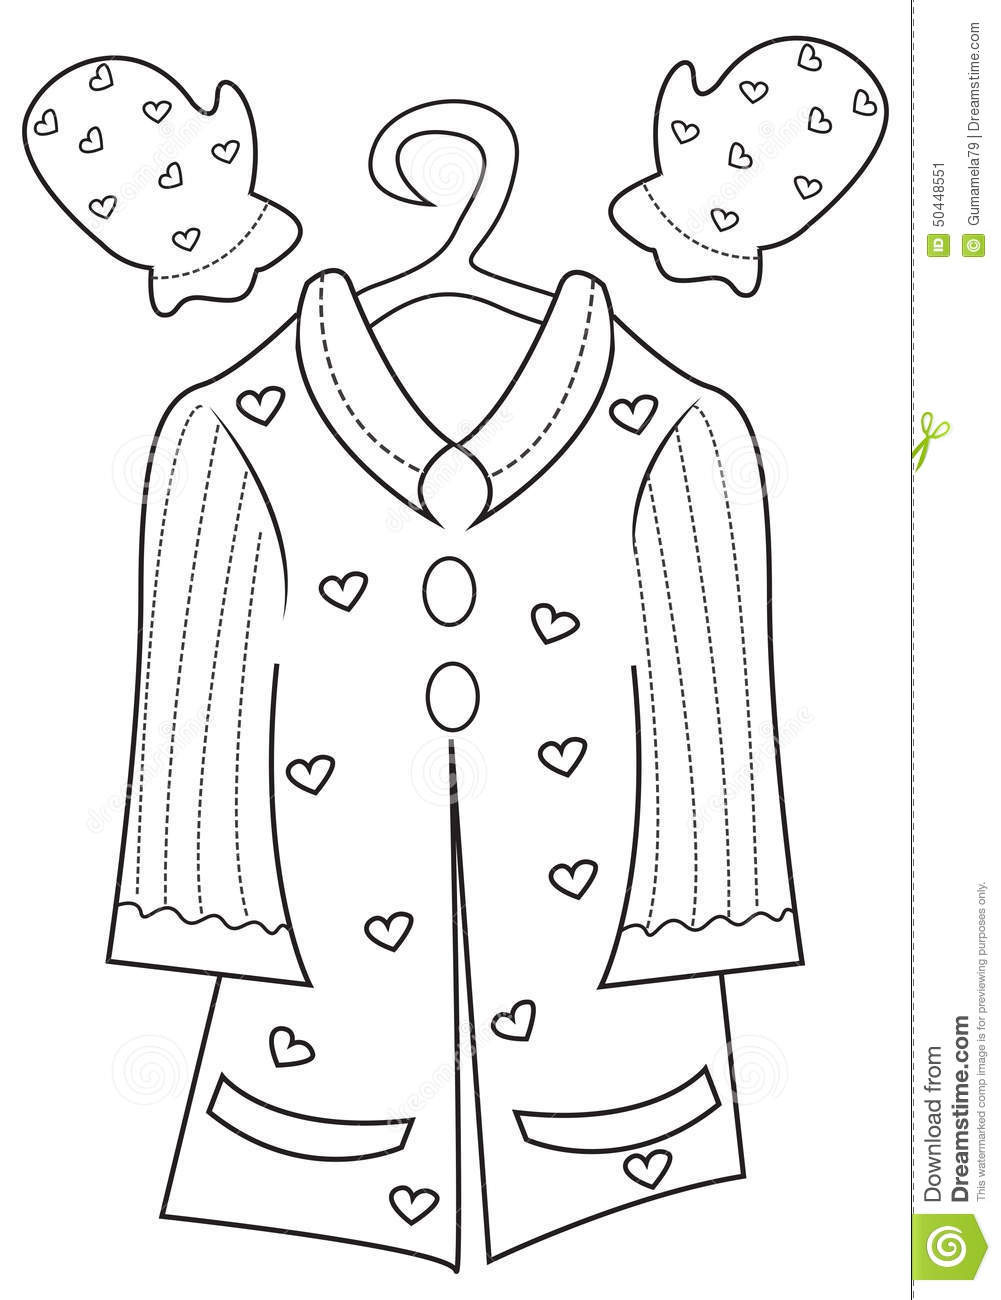 Girls Clothes Coloring Pages
 Girl s Clothing Coloring Page Stock Illustration Image